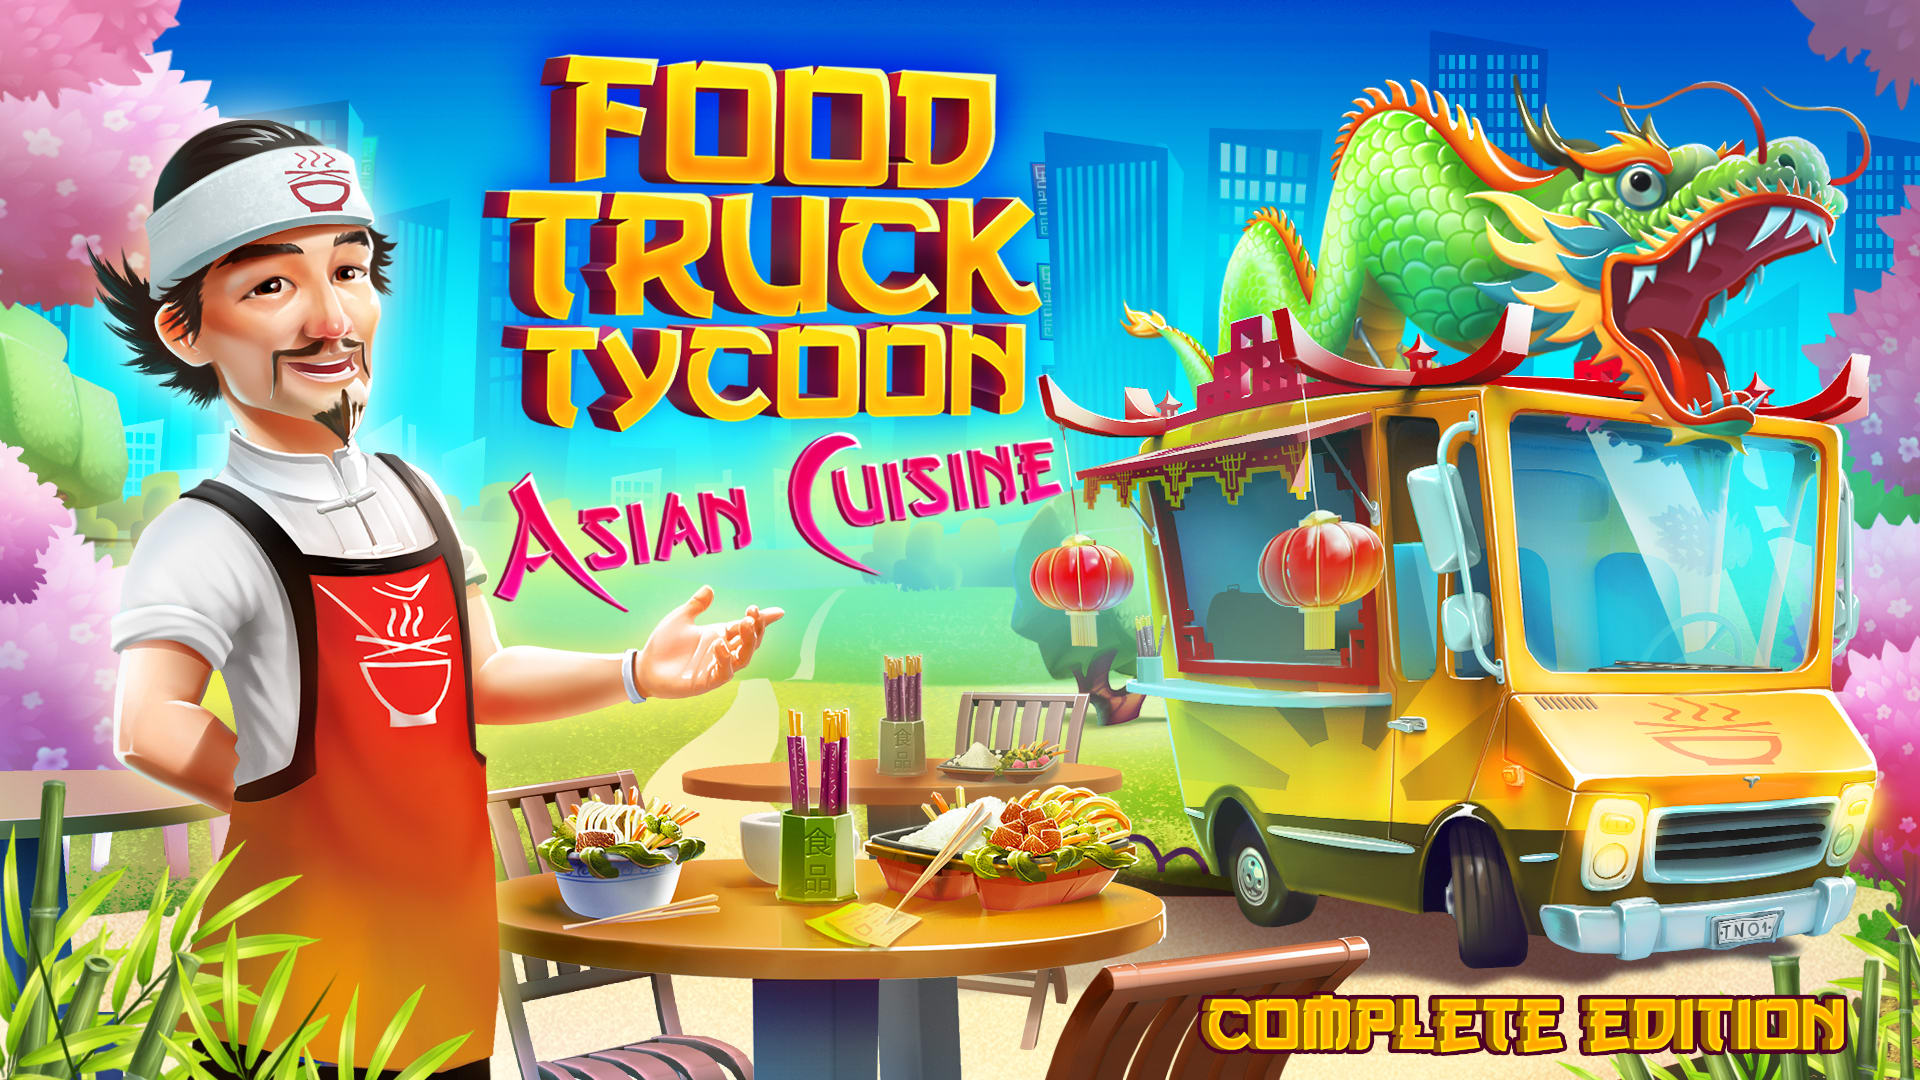 Food Truck Tycoon - Asian Cuisine Complete Edition